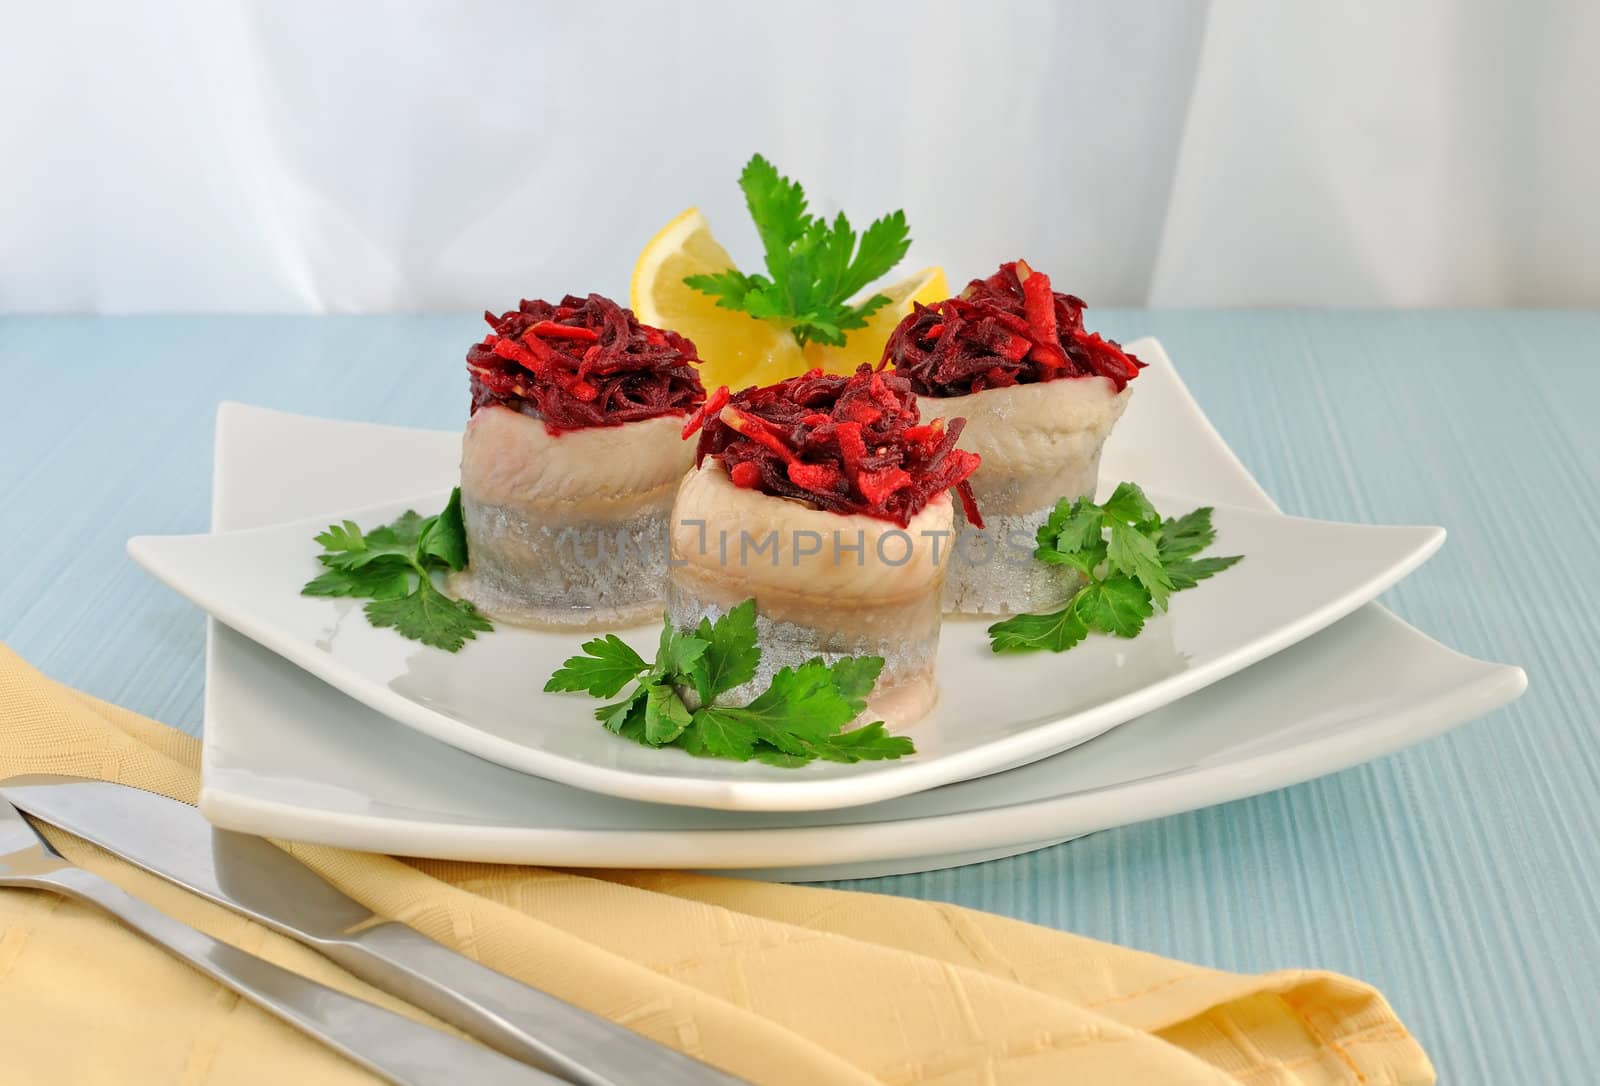 Herring stuffed with beet-apple stuffing by Apolonia